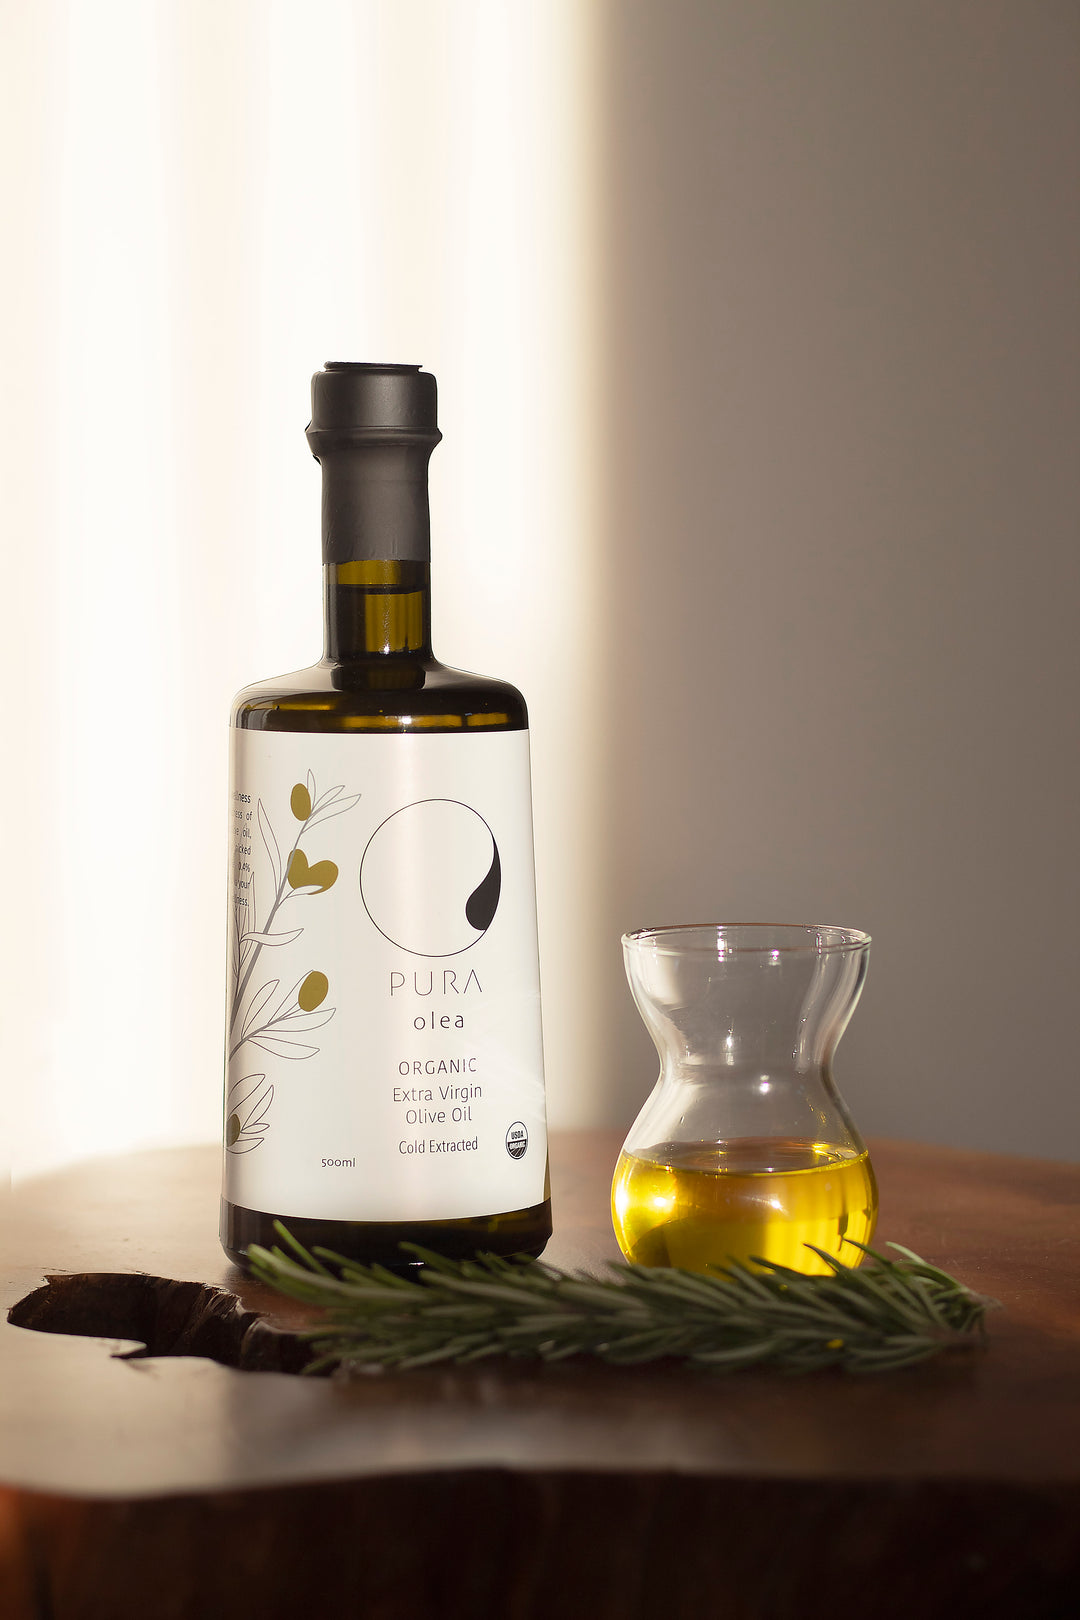 Is High Polyphenol Olive Oil Good For Losing Weight?